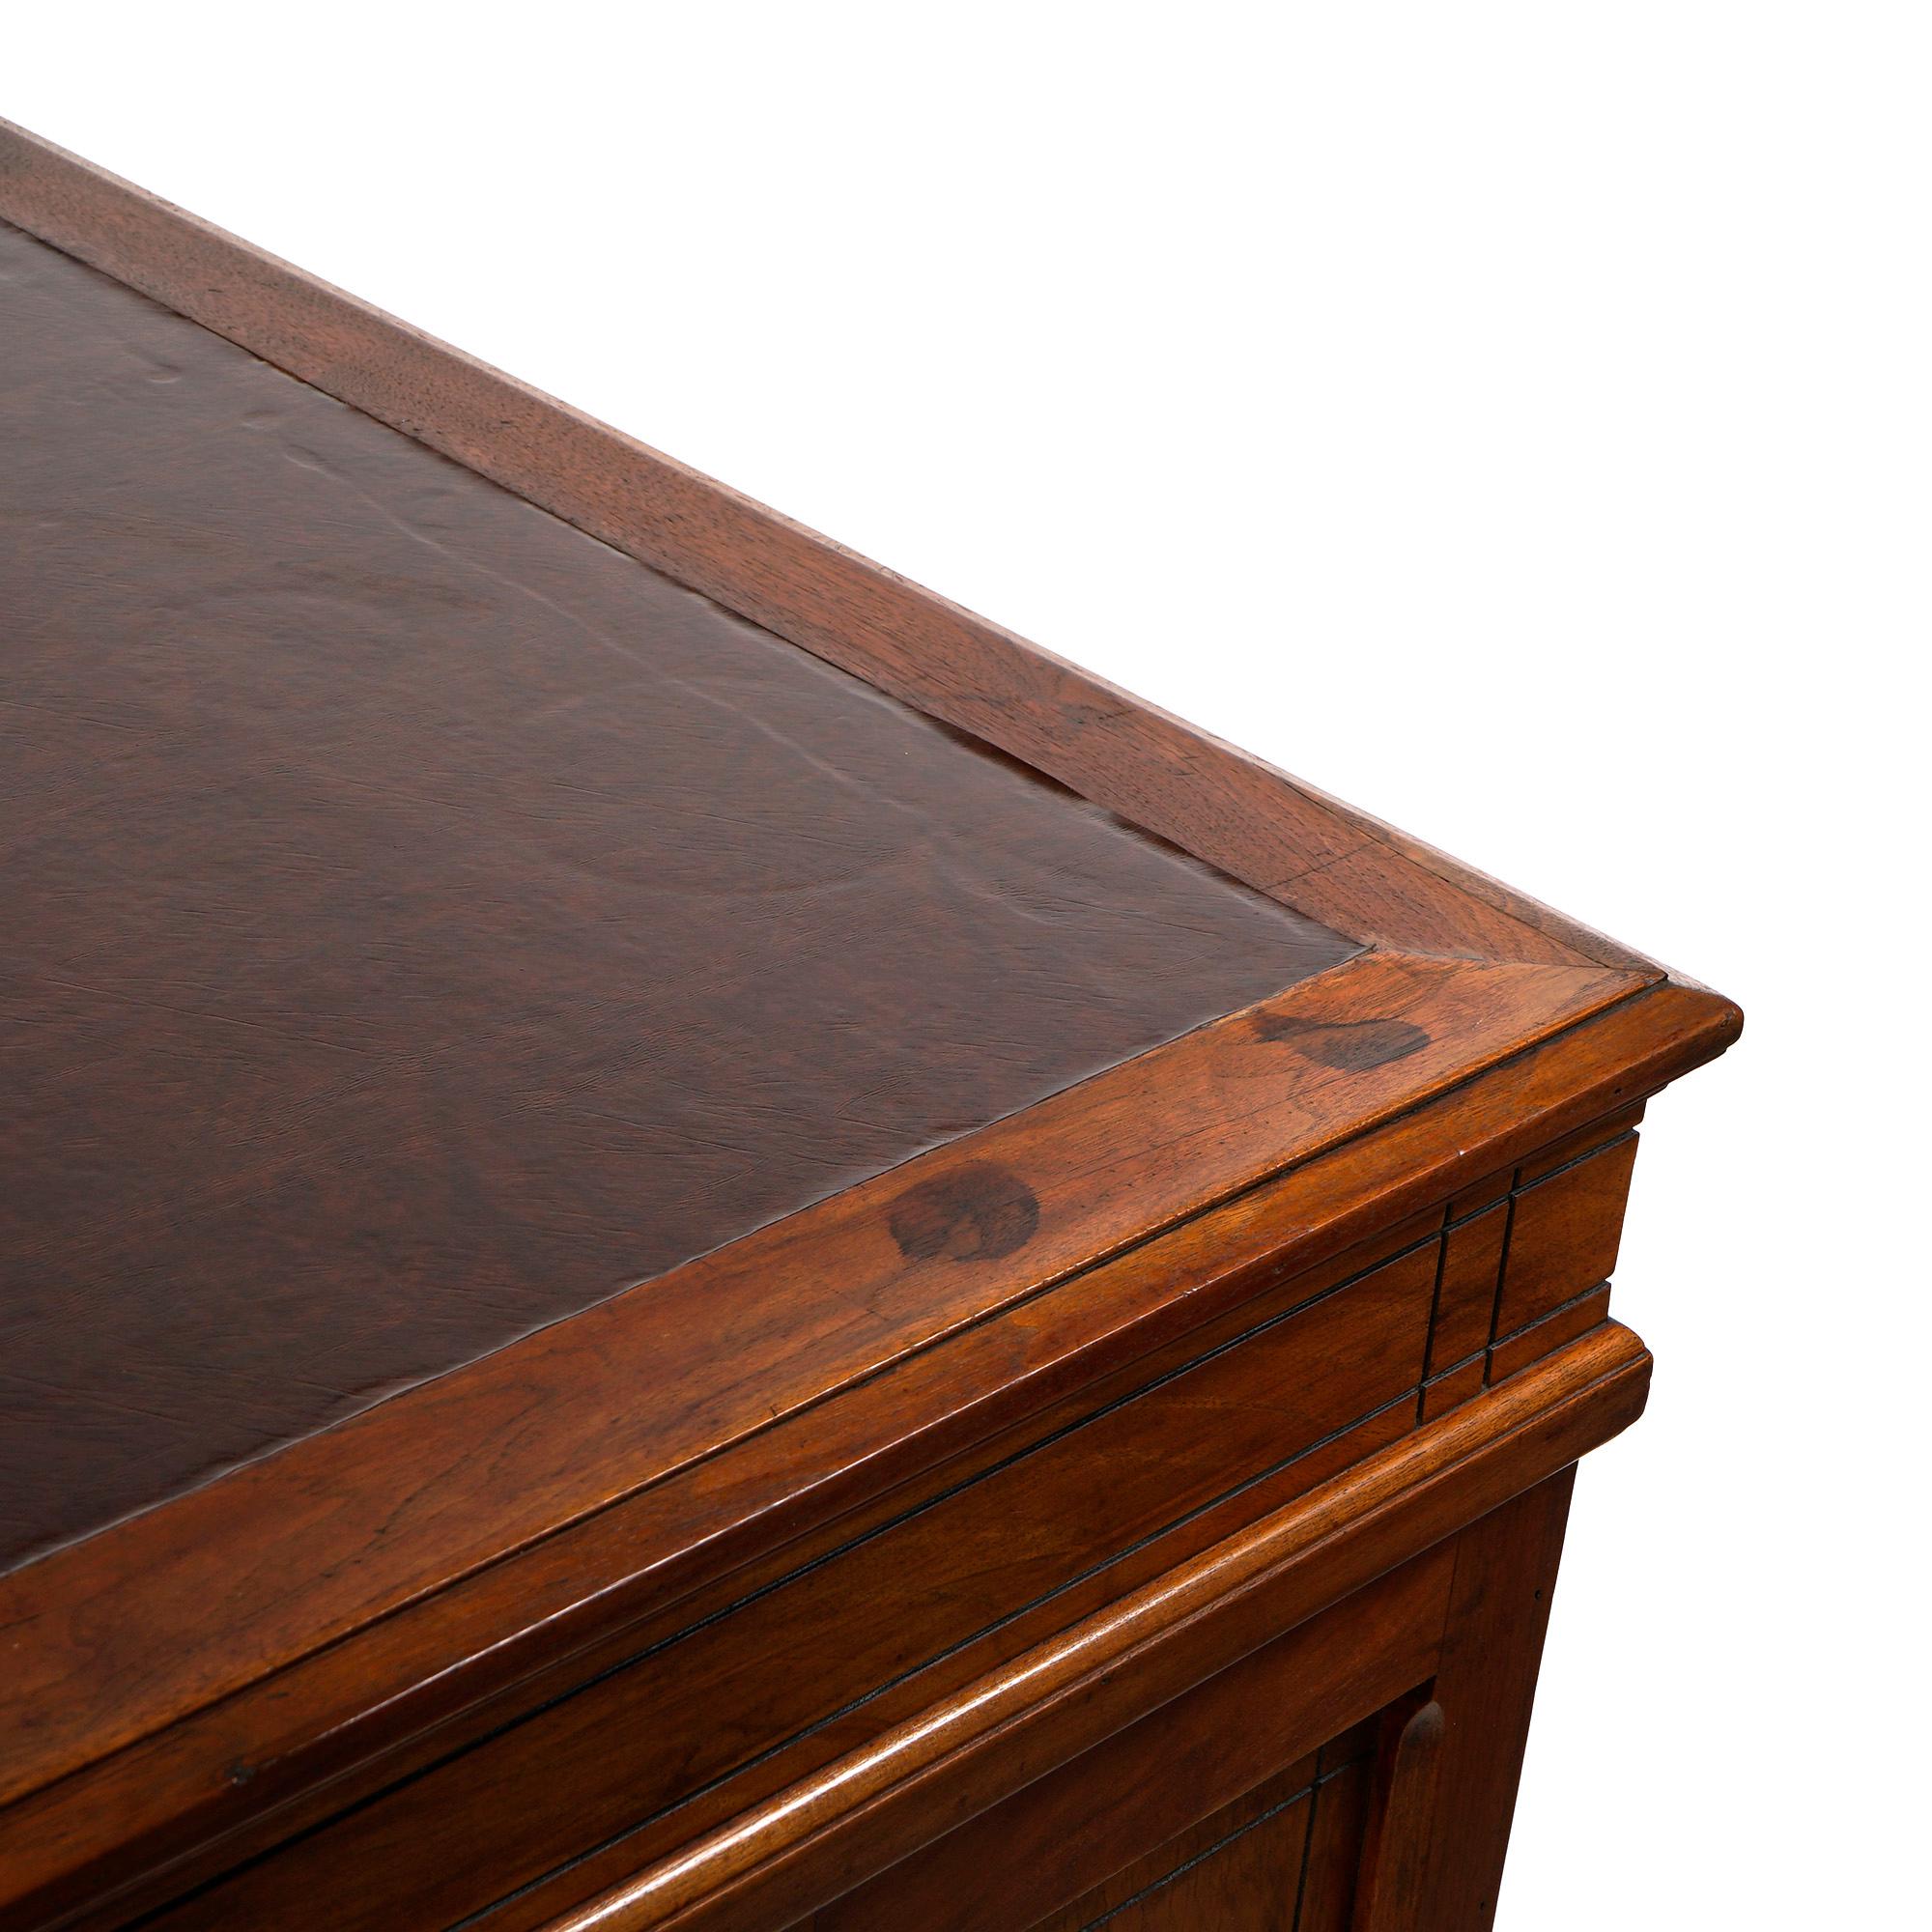 Antique Paneled Walnut Rotary Library Desk by Wooton, Indianapolis, Circa 1890 8